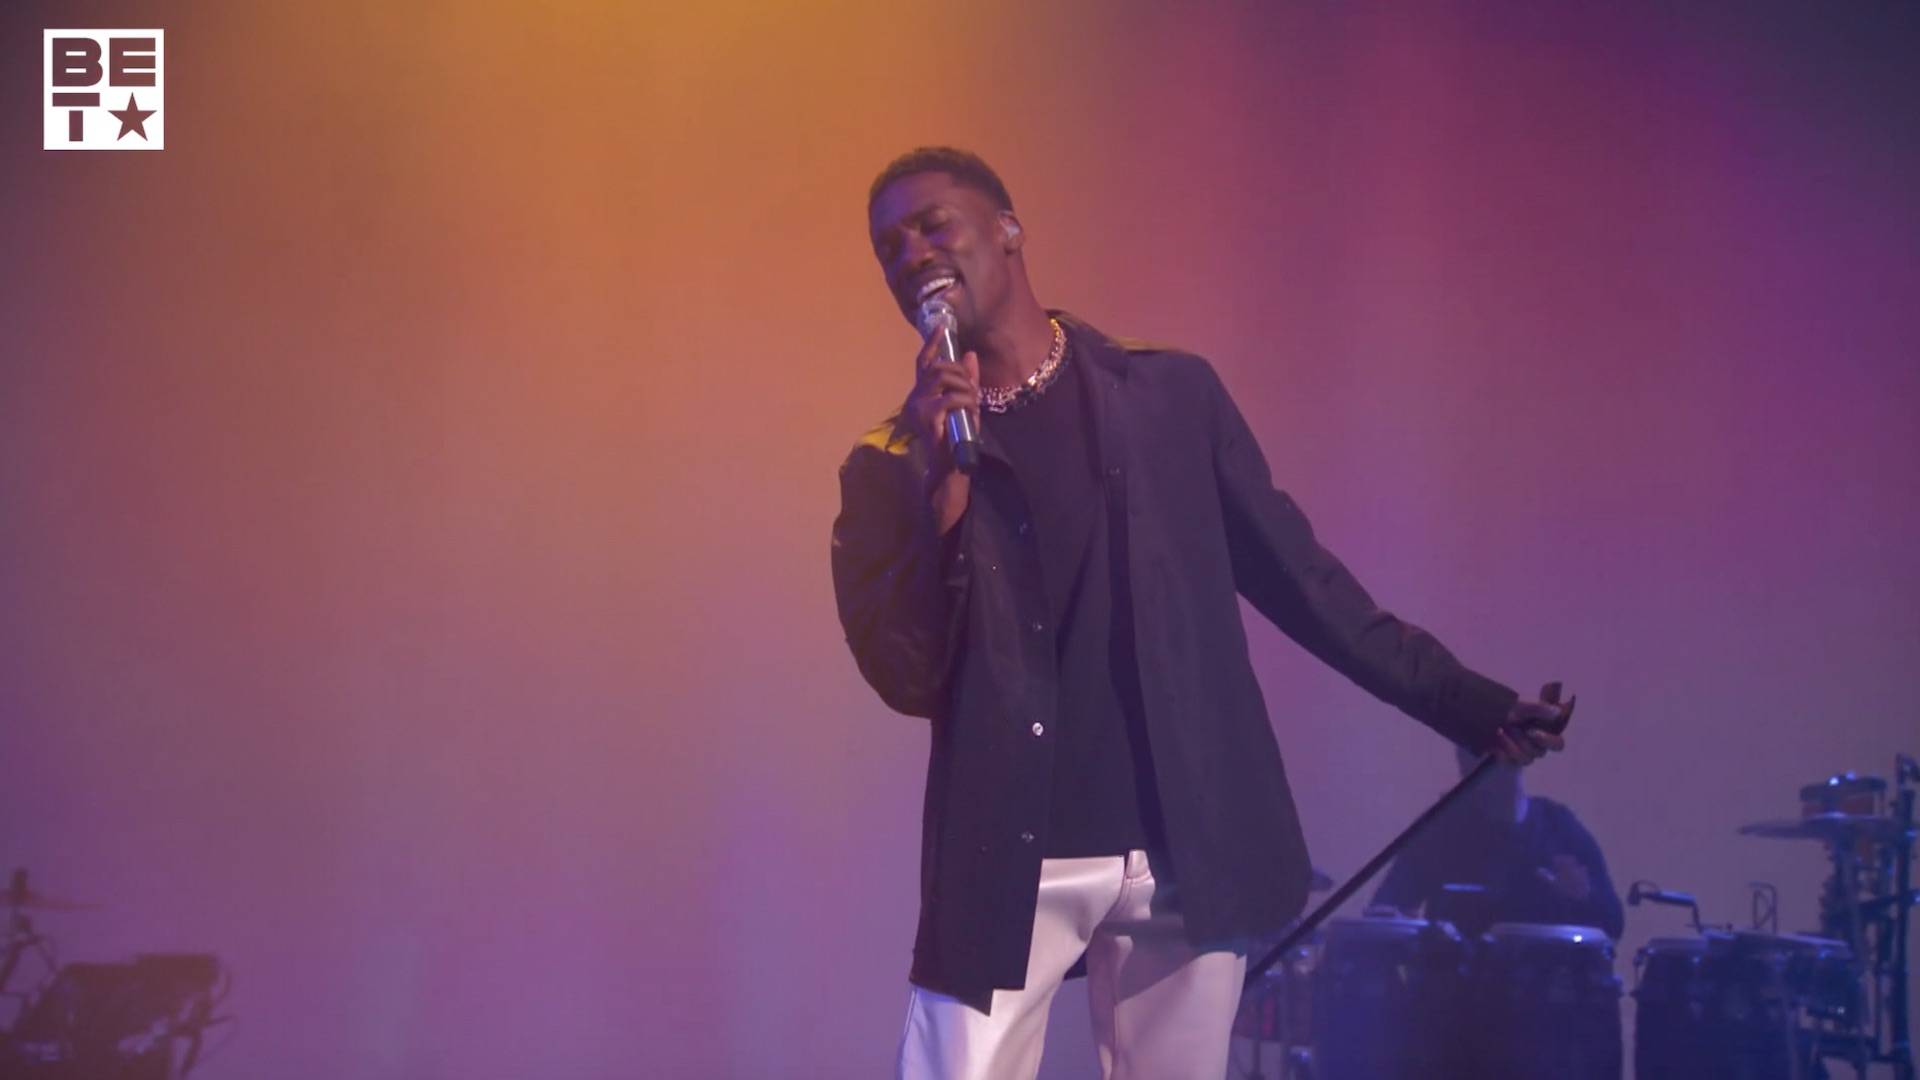 Giveon performs his songs "Heartbreak Anniversary," "For Tonight" and "Lie Again" at the BET Awards 2022.